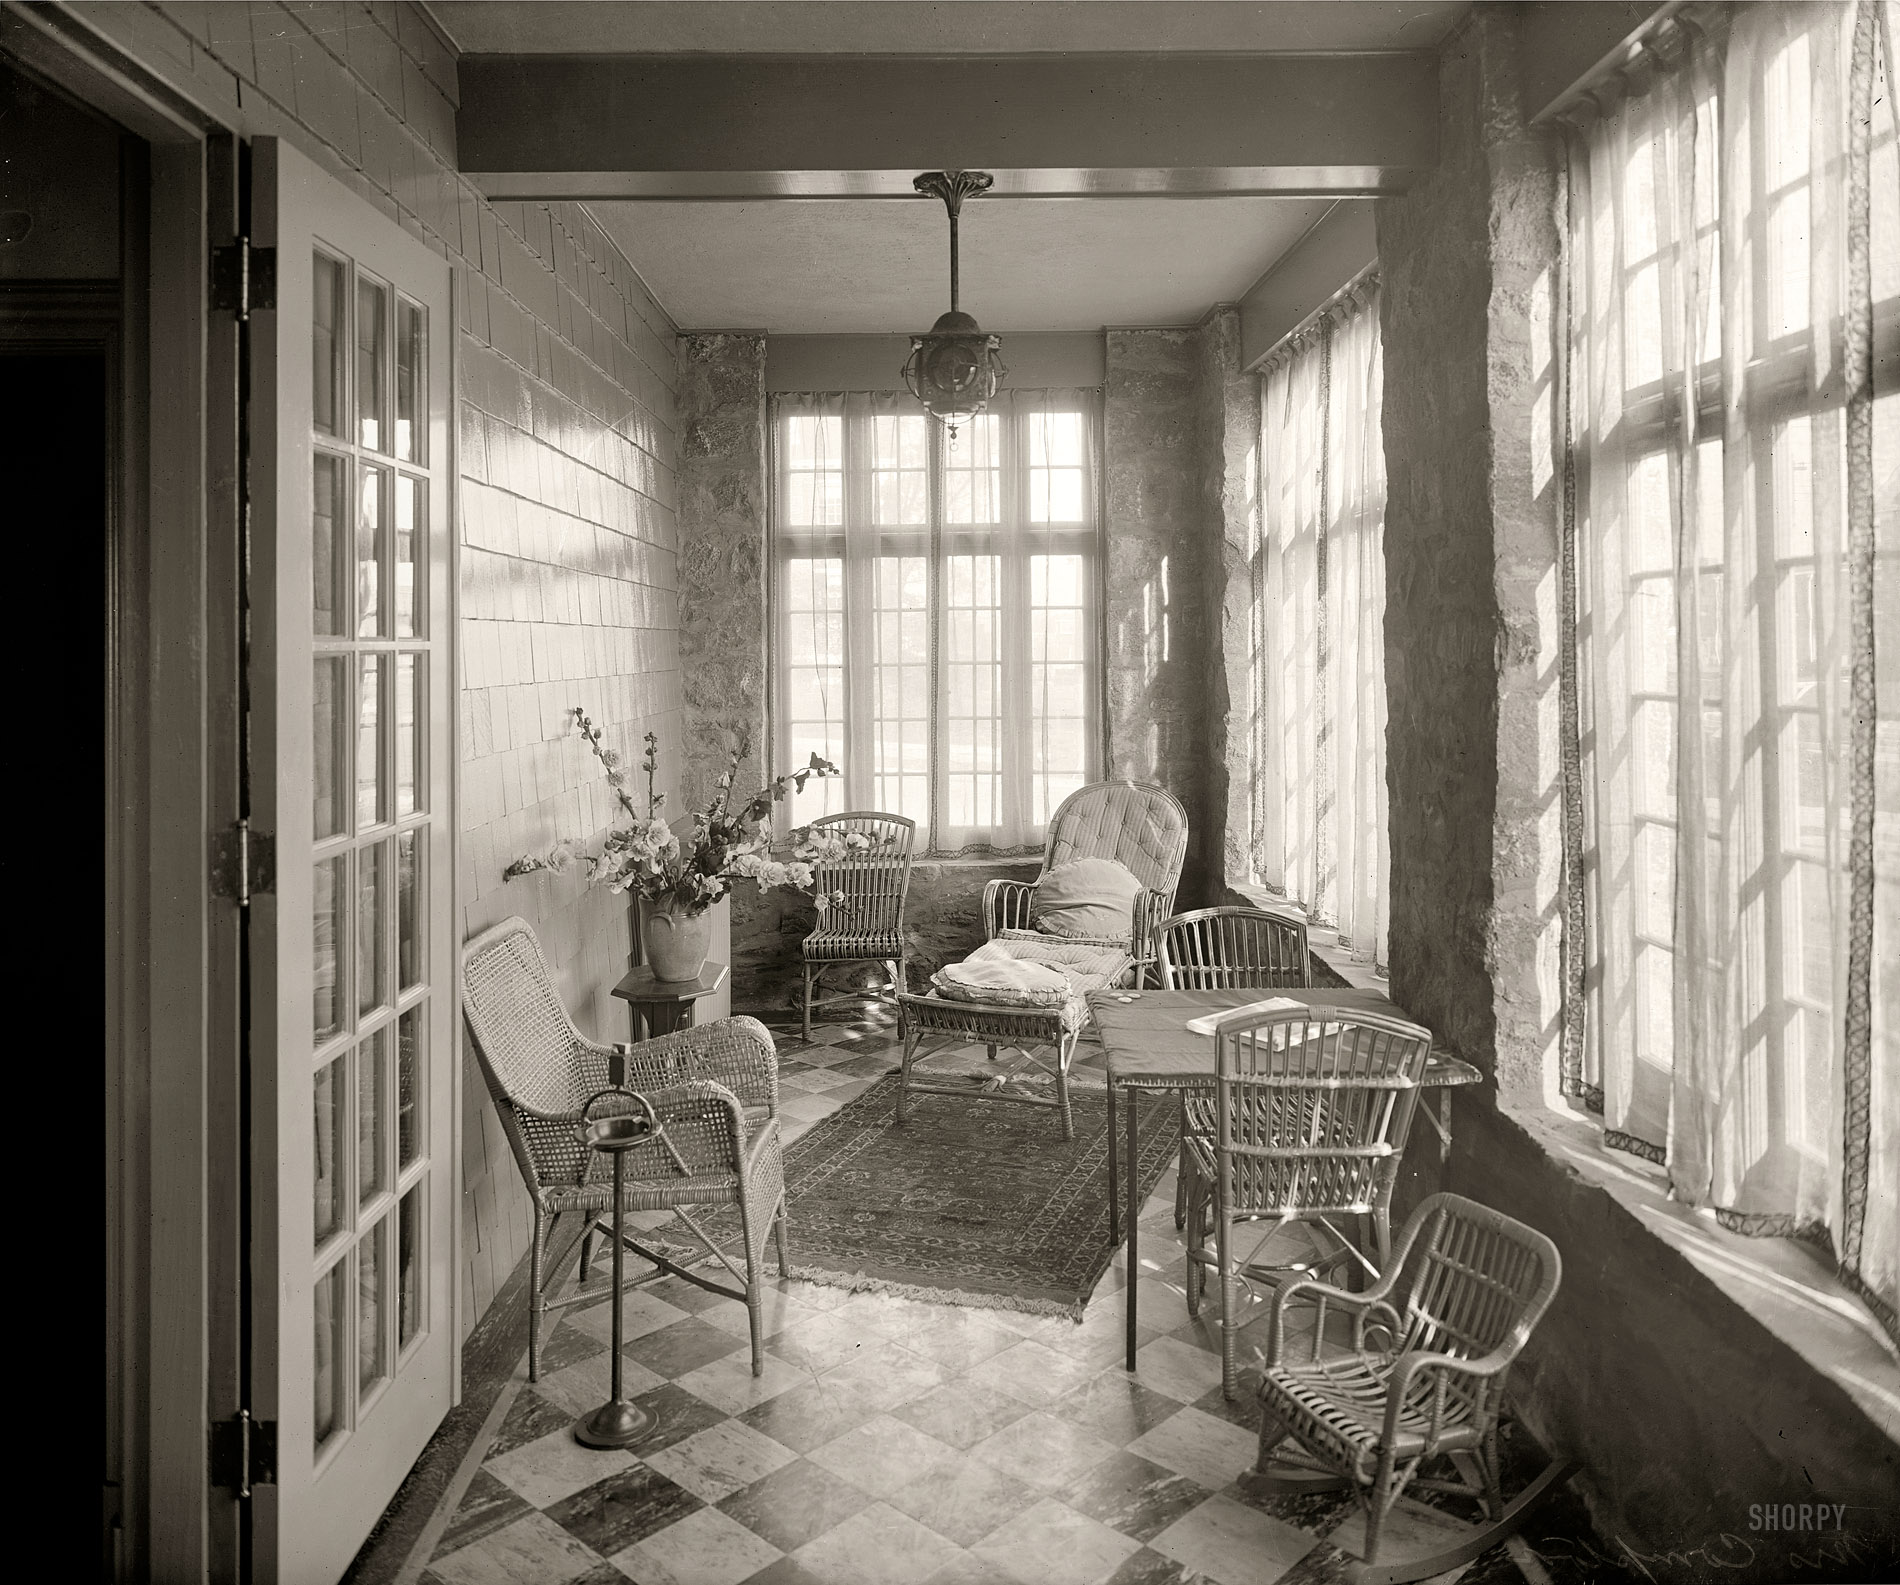 Washington, D.C., circa 1920. "Mrs. Wilson Compton." One of 10 glass negatives so labeled, none of them actually showing Mrs. Compton. View full size.